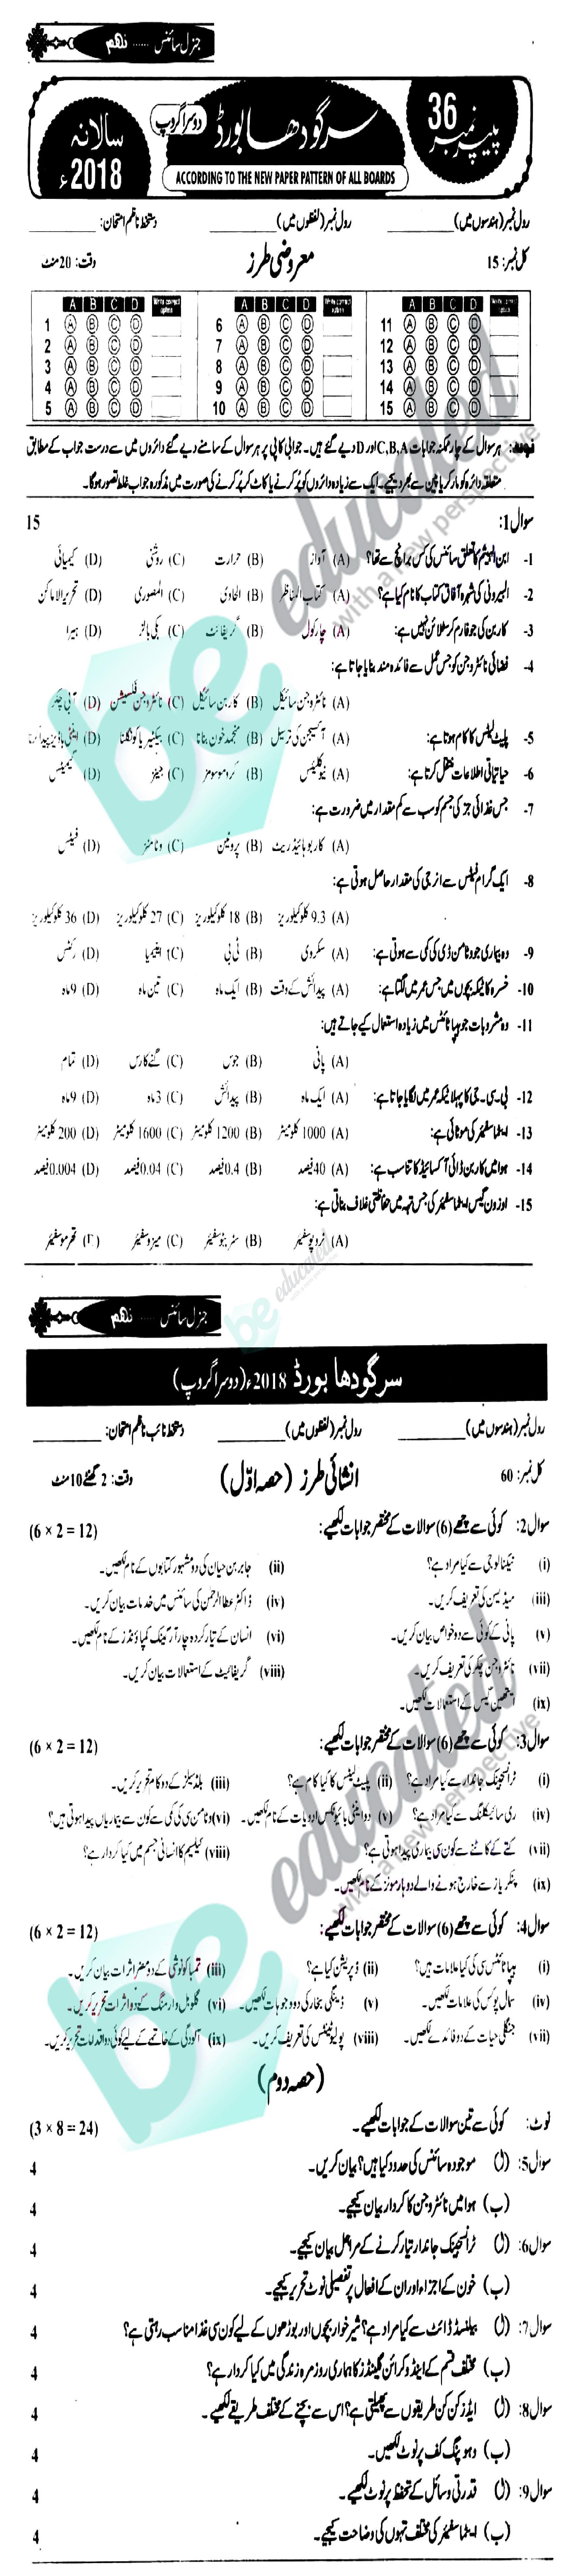 General Science 9th class Past Paper Group 2 BISE Sargodha 2018